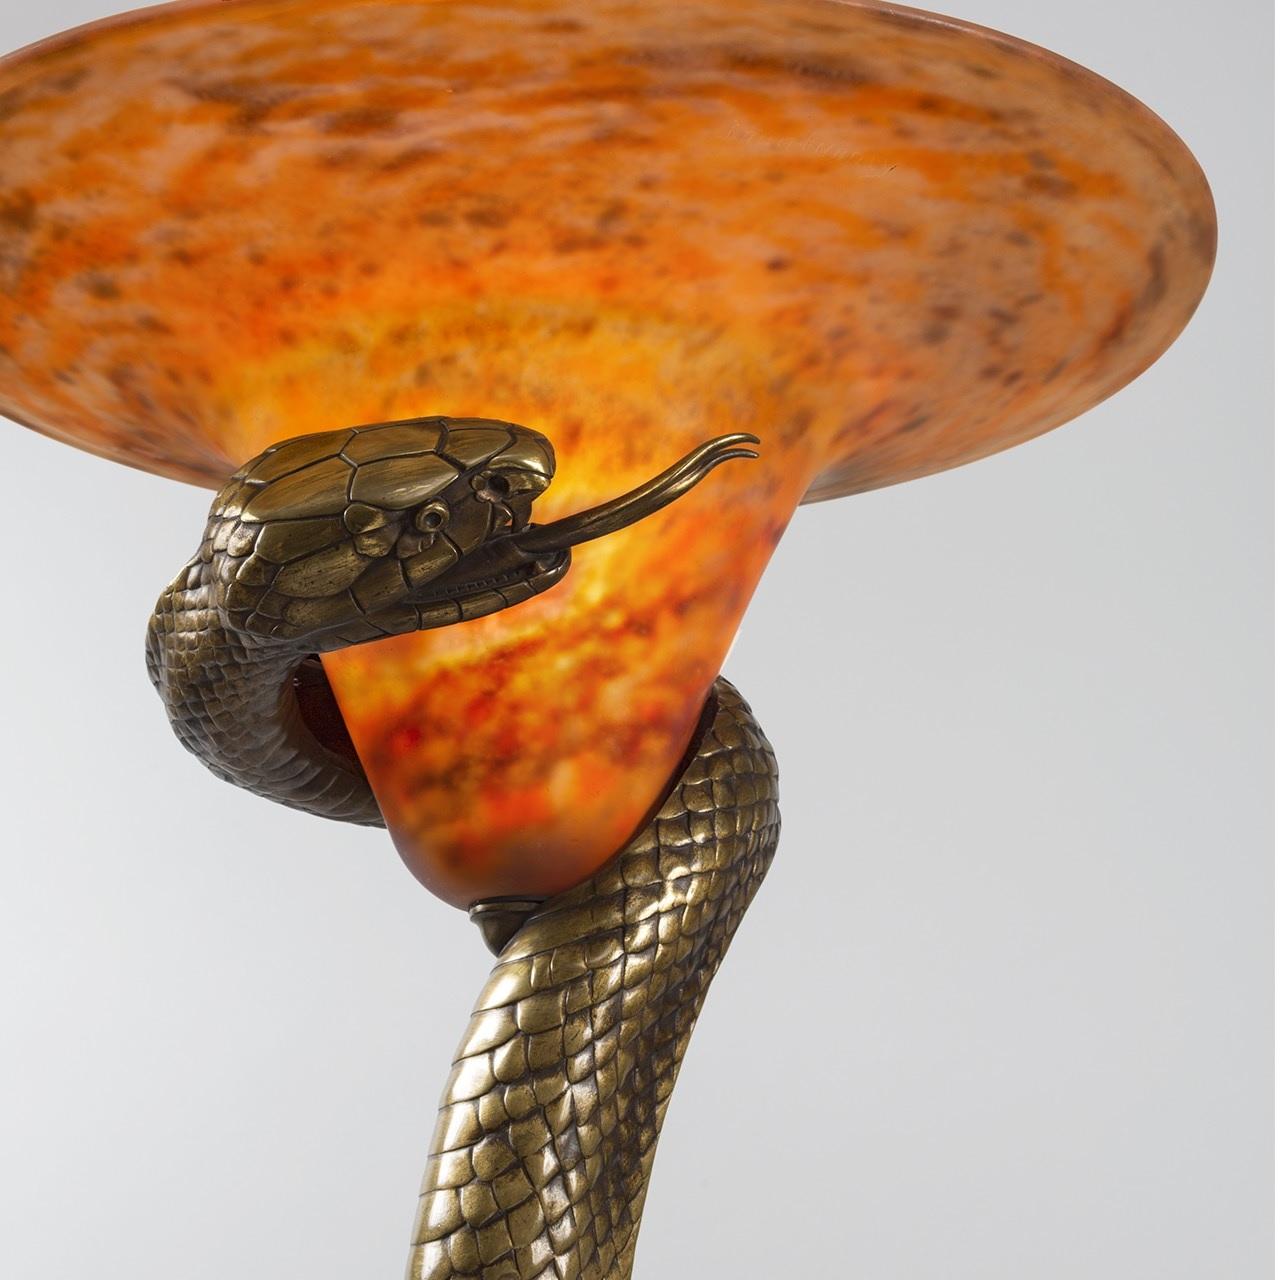 A French Art Deco serpent lamp by Edgar Brandt and Daum titled “La Tentation”. The lamp features a bronze cobra with a rich golden brown color. The snake is almost completely vertically extended, standing on the lid of a woven basket. Its head